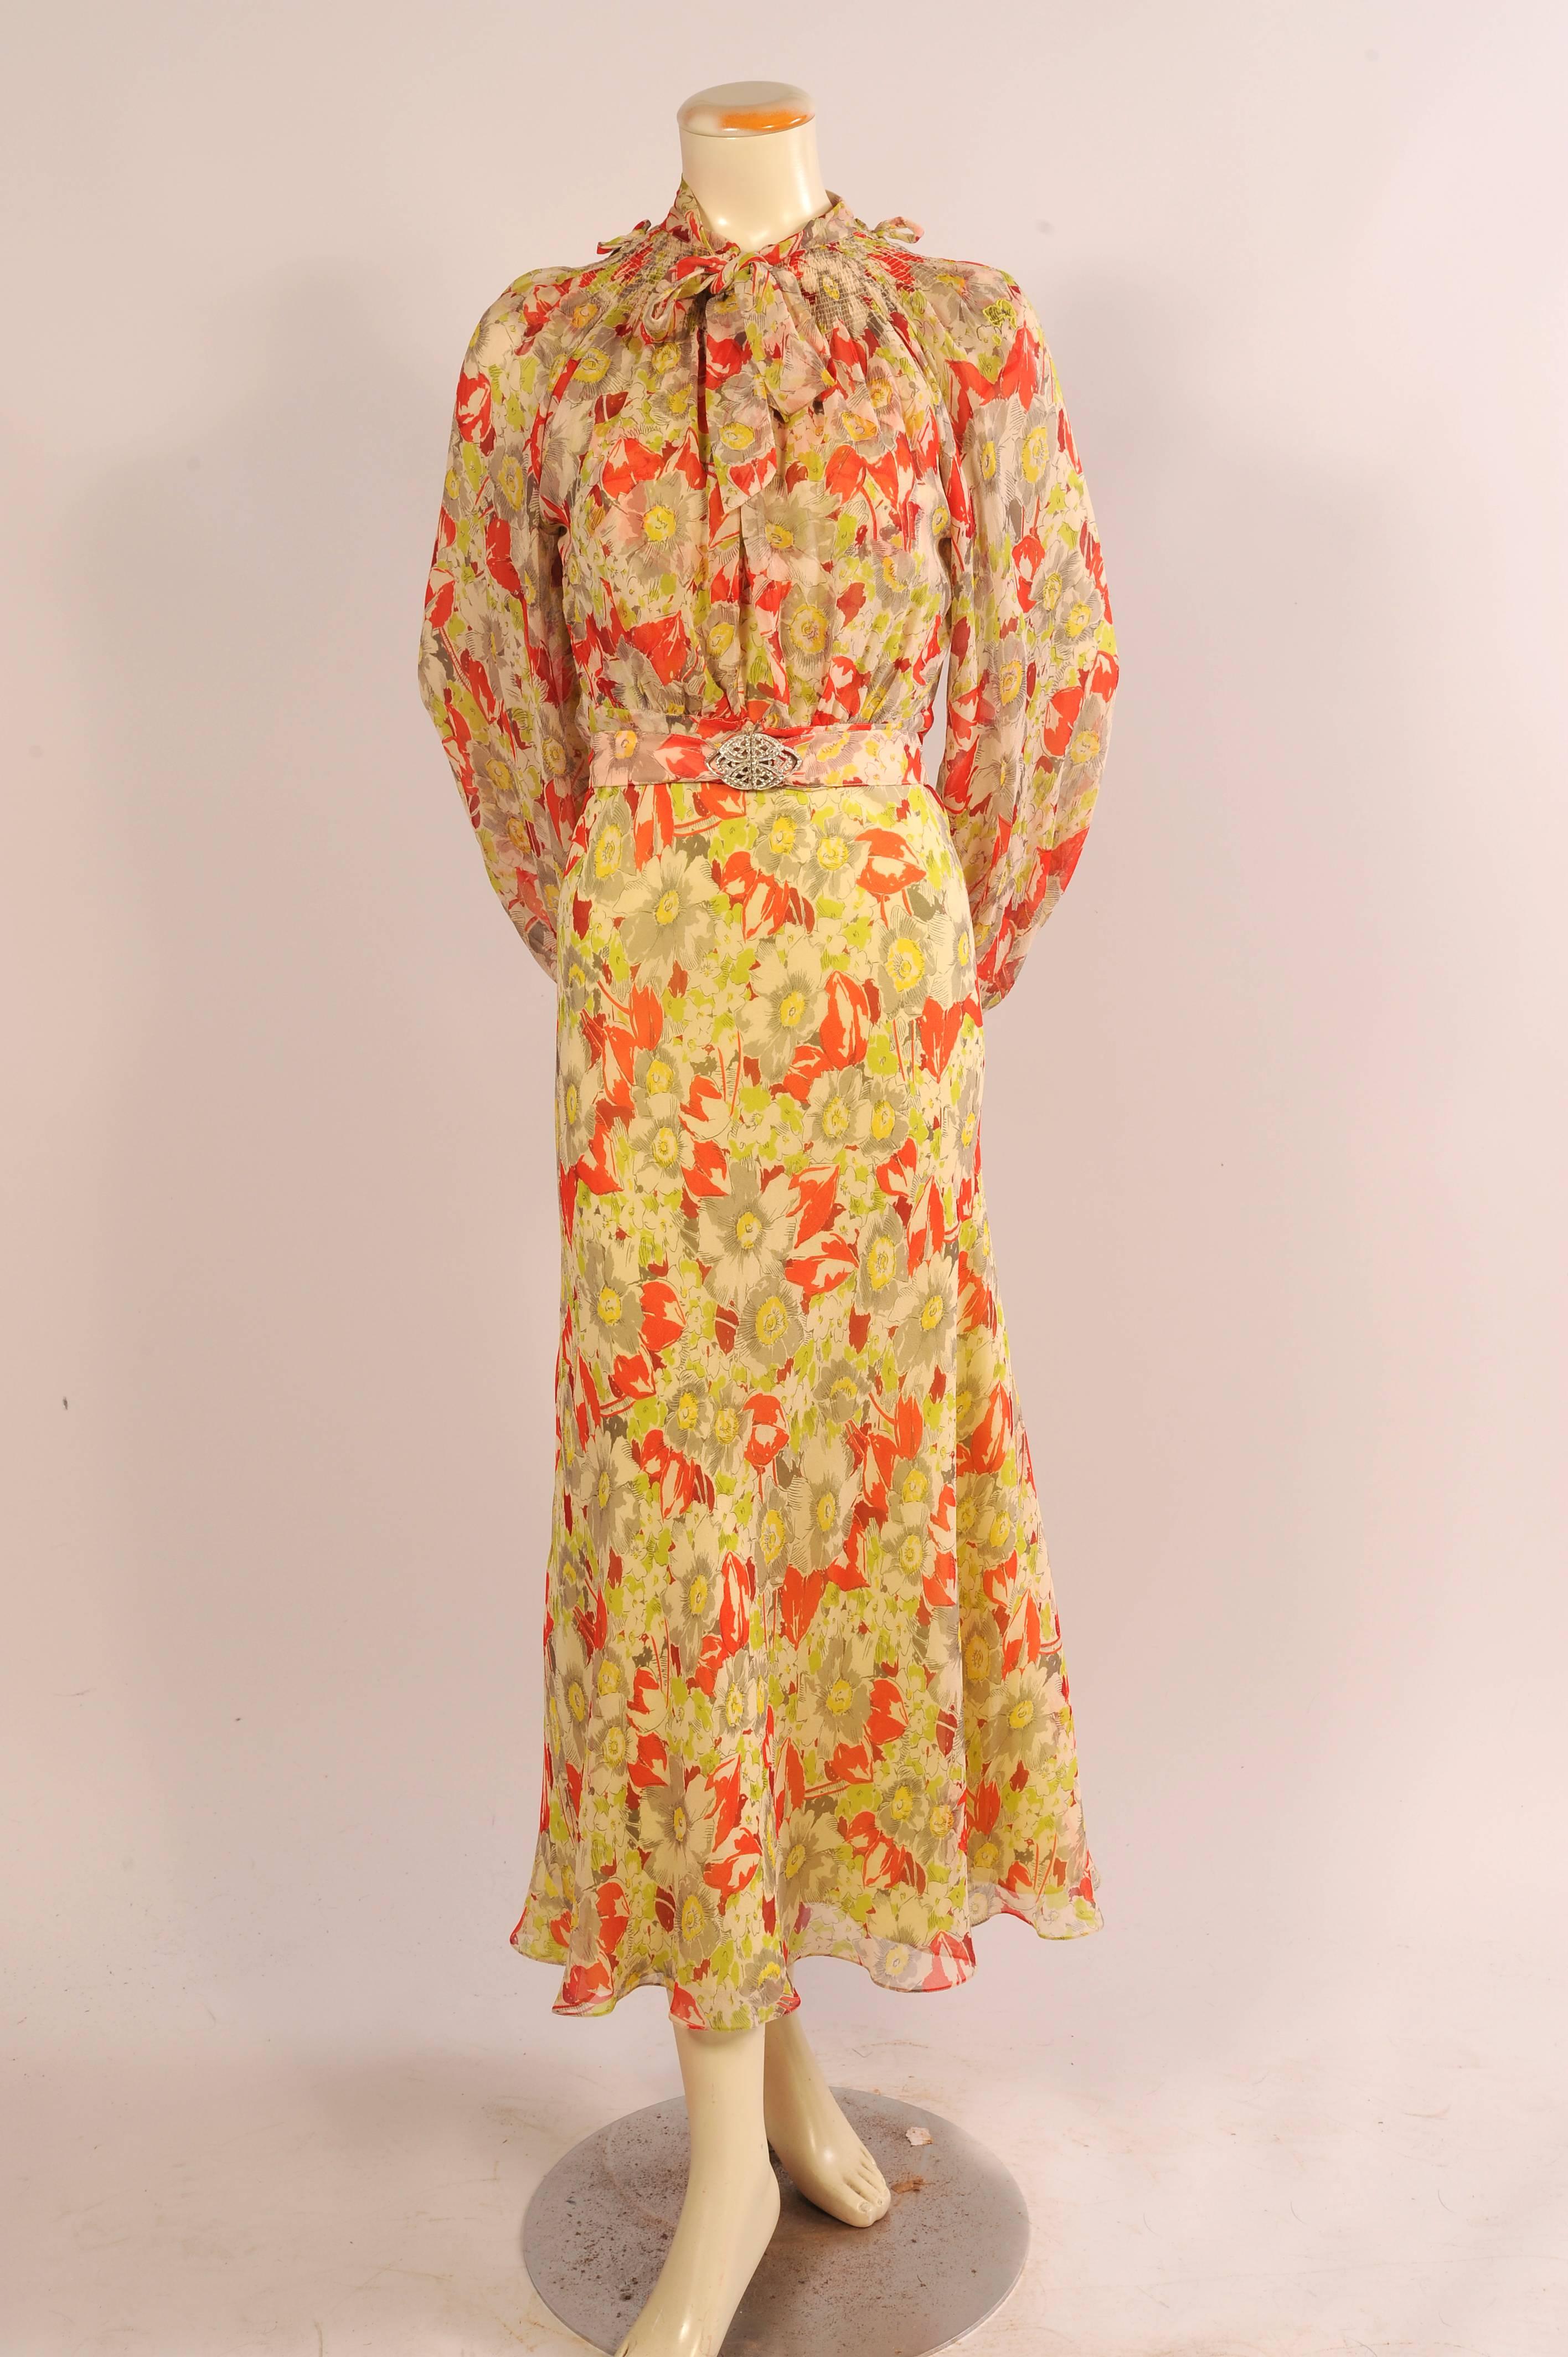 Everything about this dress and jacket says 1930's except for the fantastic quality of workmanship and the excellent condition of the outfit. Inspired by the 1930's this bias cut silk chiffon dress has a round neckline, cap sleeves, a raised Empire